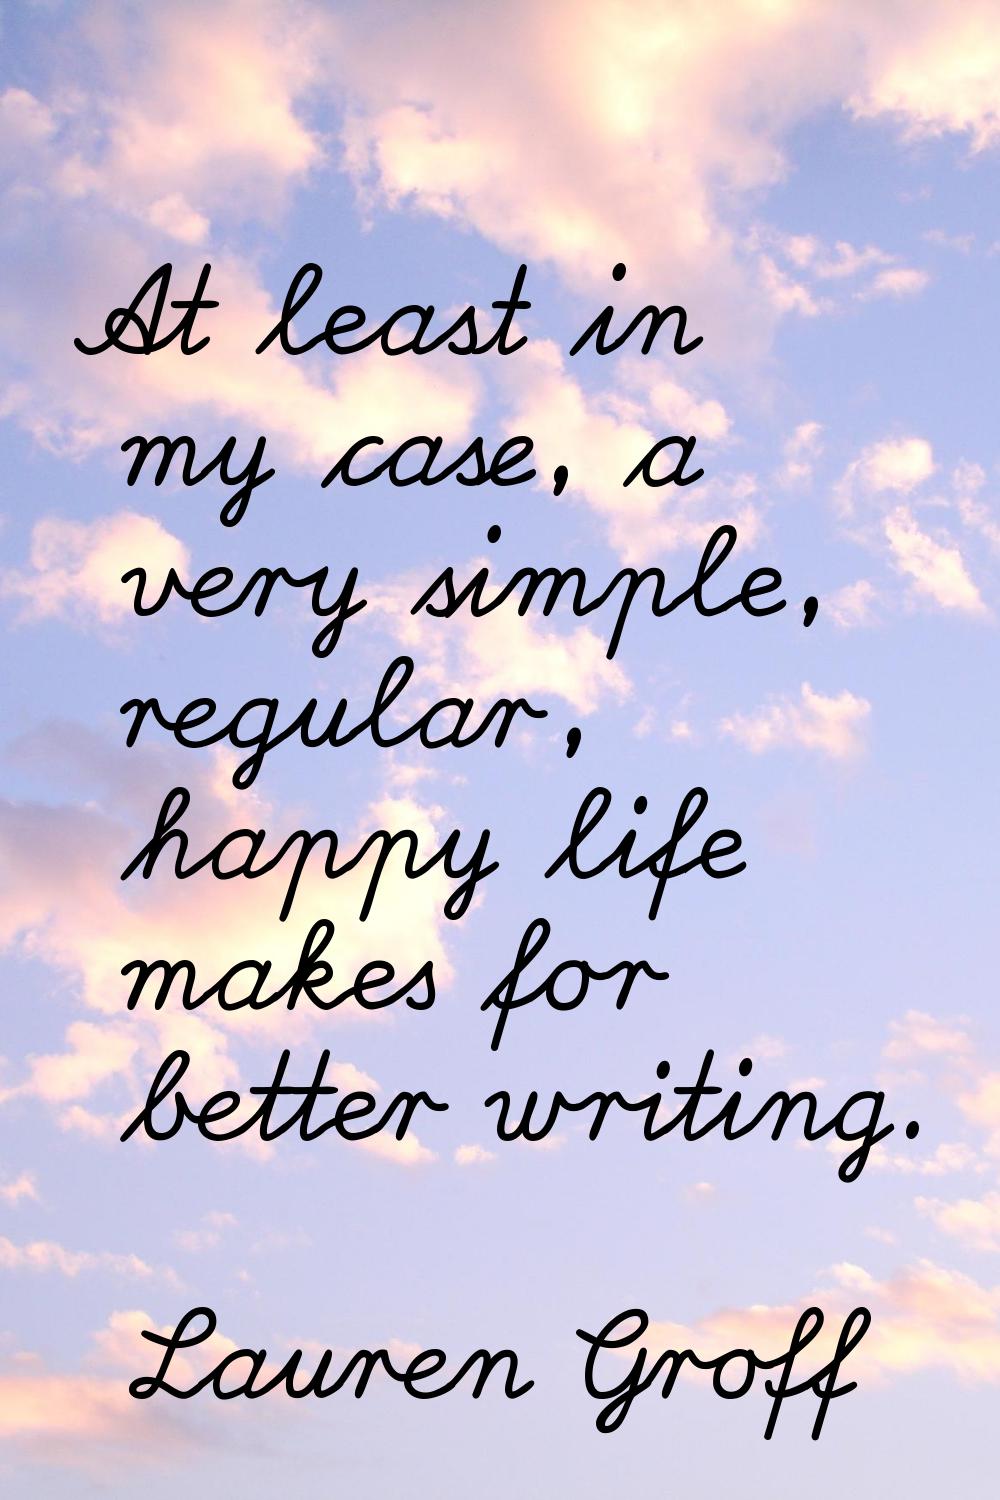 At least in my case, a very simple, regular, happy life makes for better writing.